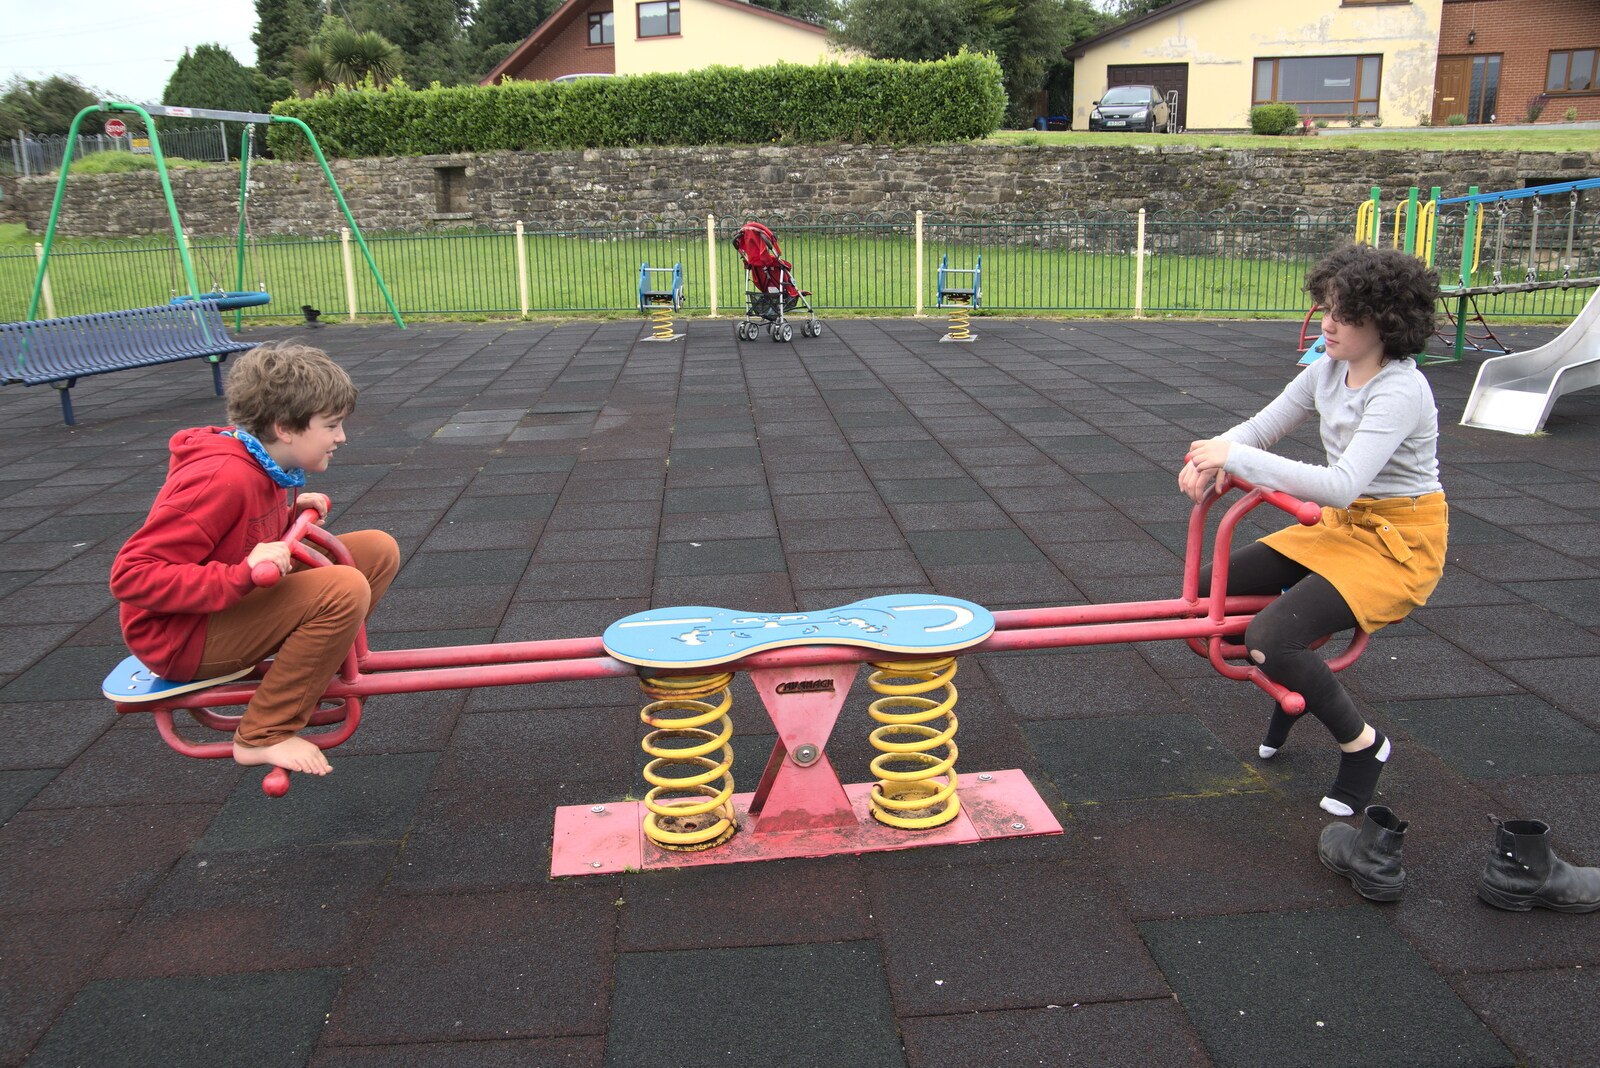 Fred and Fern on the seesaw from Manorhamilton and the Street Art of Dún Laoghaire, Ireland - 15th August 2021